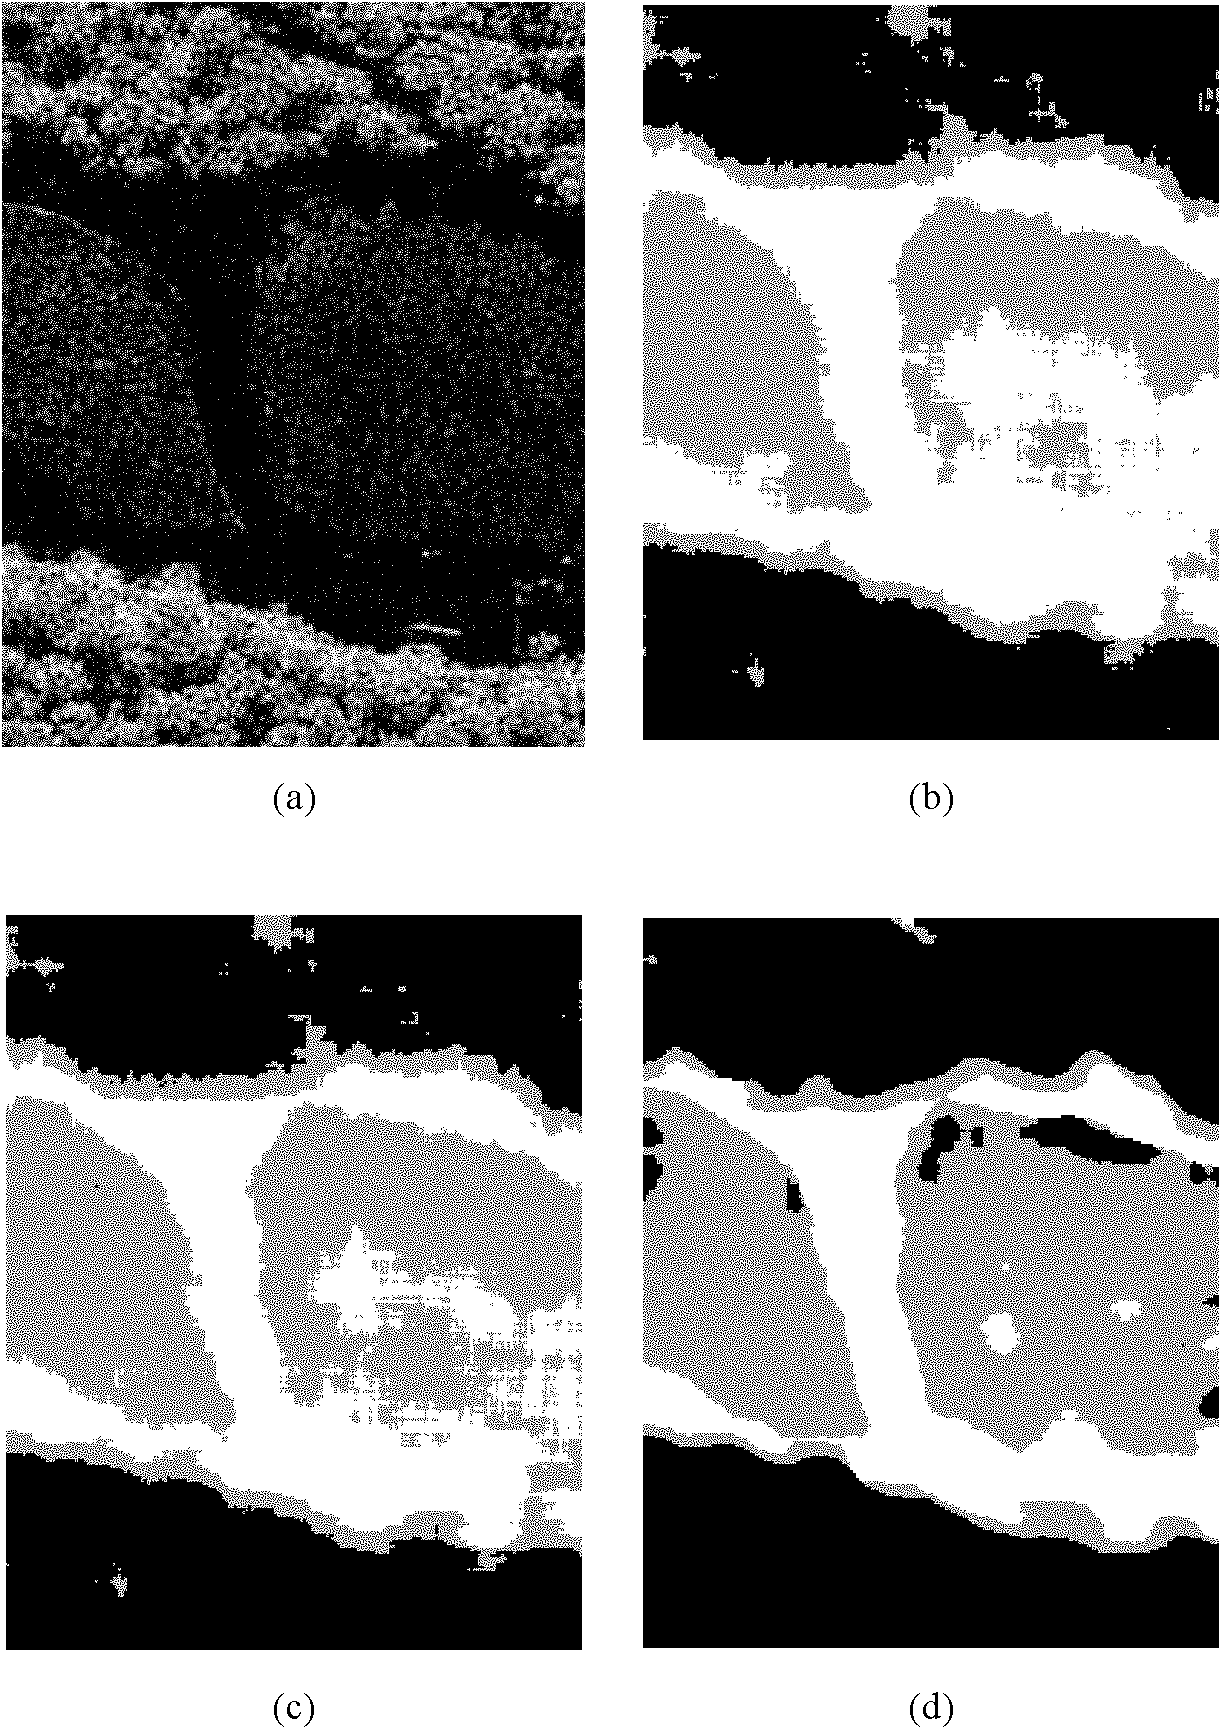 SAR (Synthetic Aperture Radar) image segmentation method based on dictionary learning and sparse representation